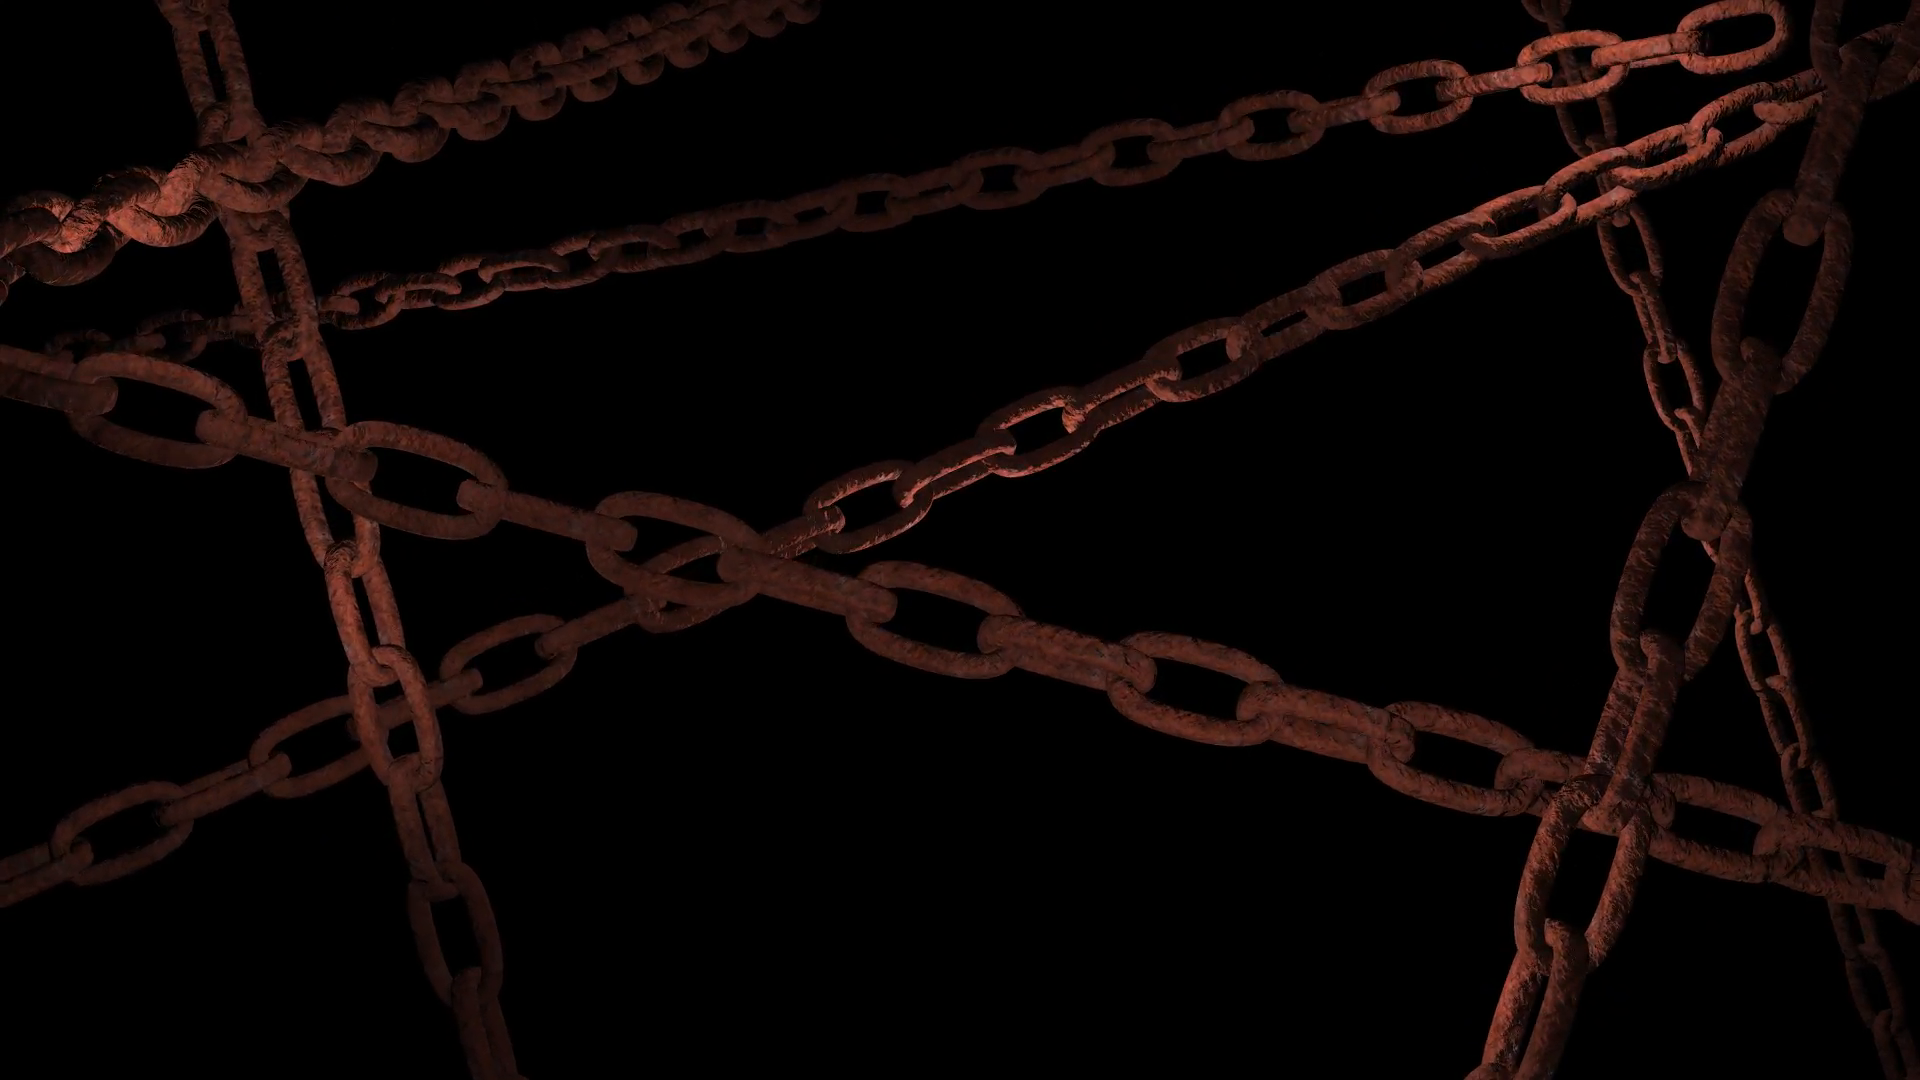 Web of Twisting/Moving Rusty Chains for Industrial/Grunge/Horror ...